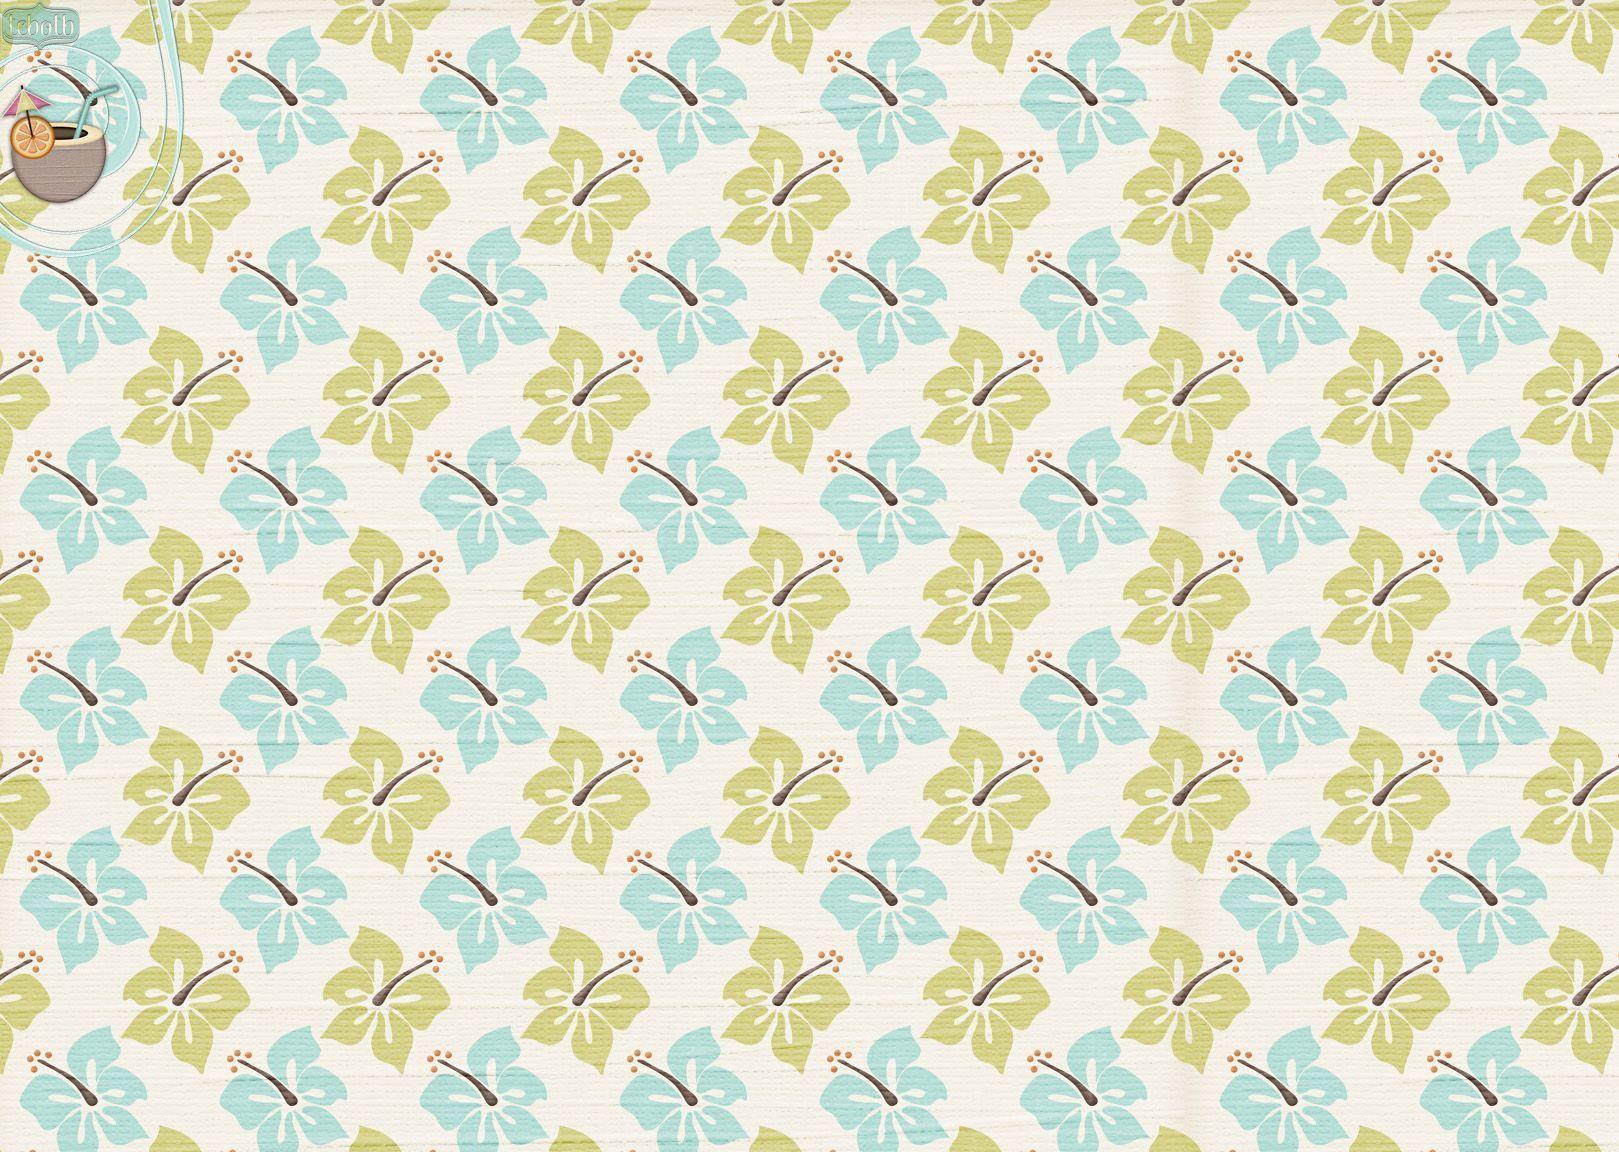 Summer Bliss Twitter Background. The Cutest Blog On The Block